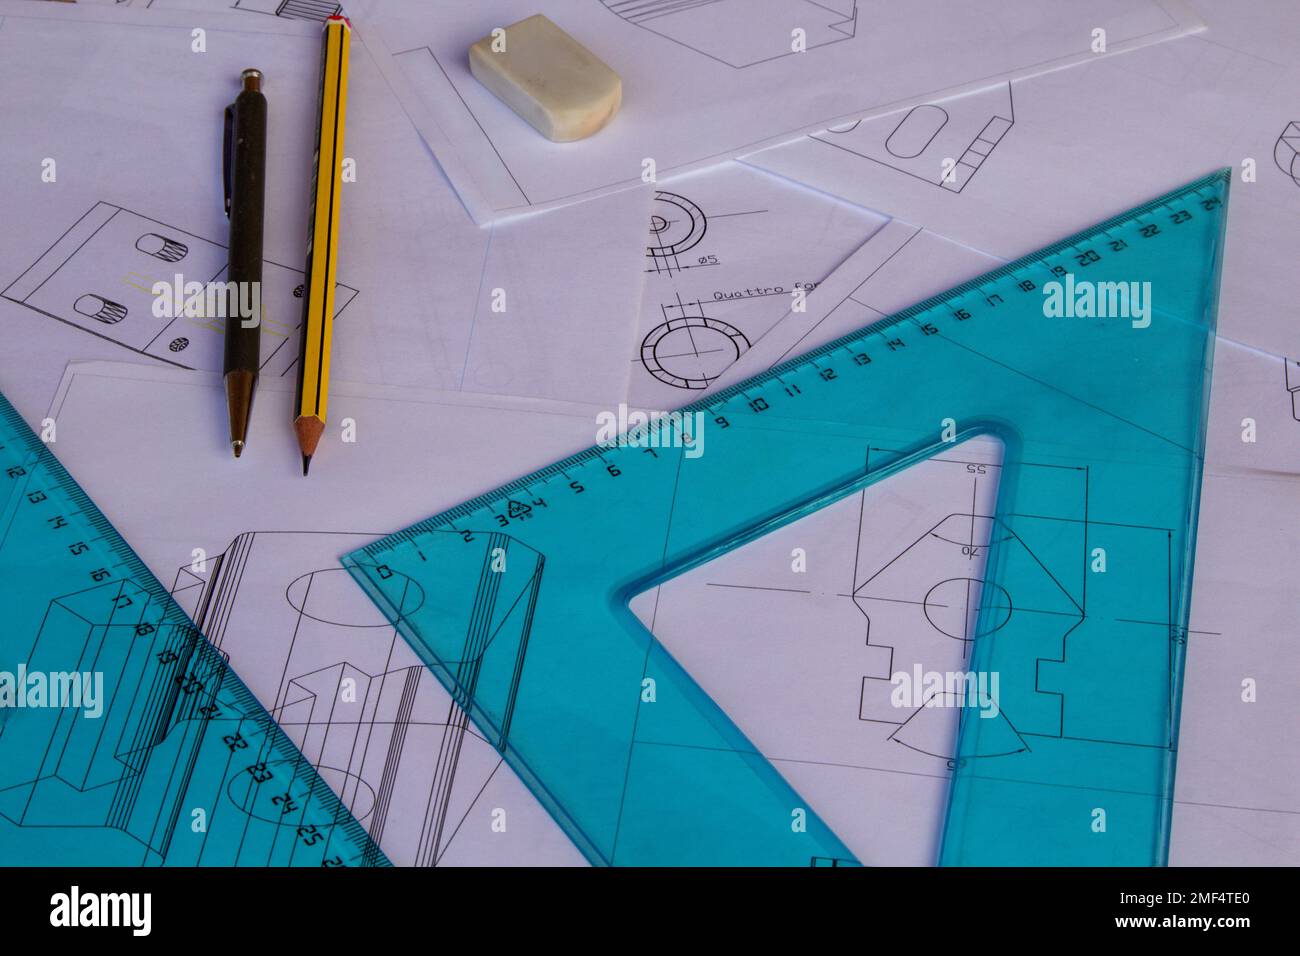 Image of an engineer's table with plans drawn with cad with ruler, set squares and drawing pencils in the background. Stock Photo